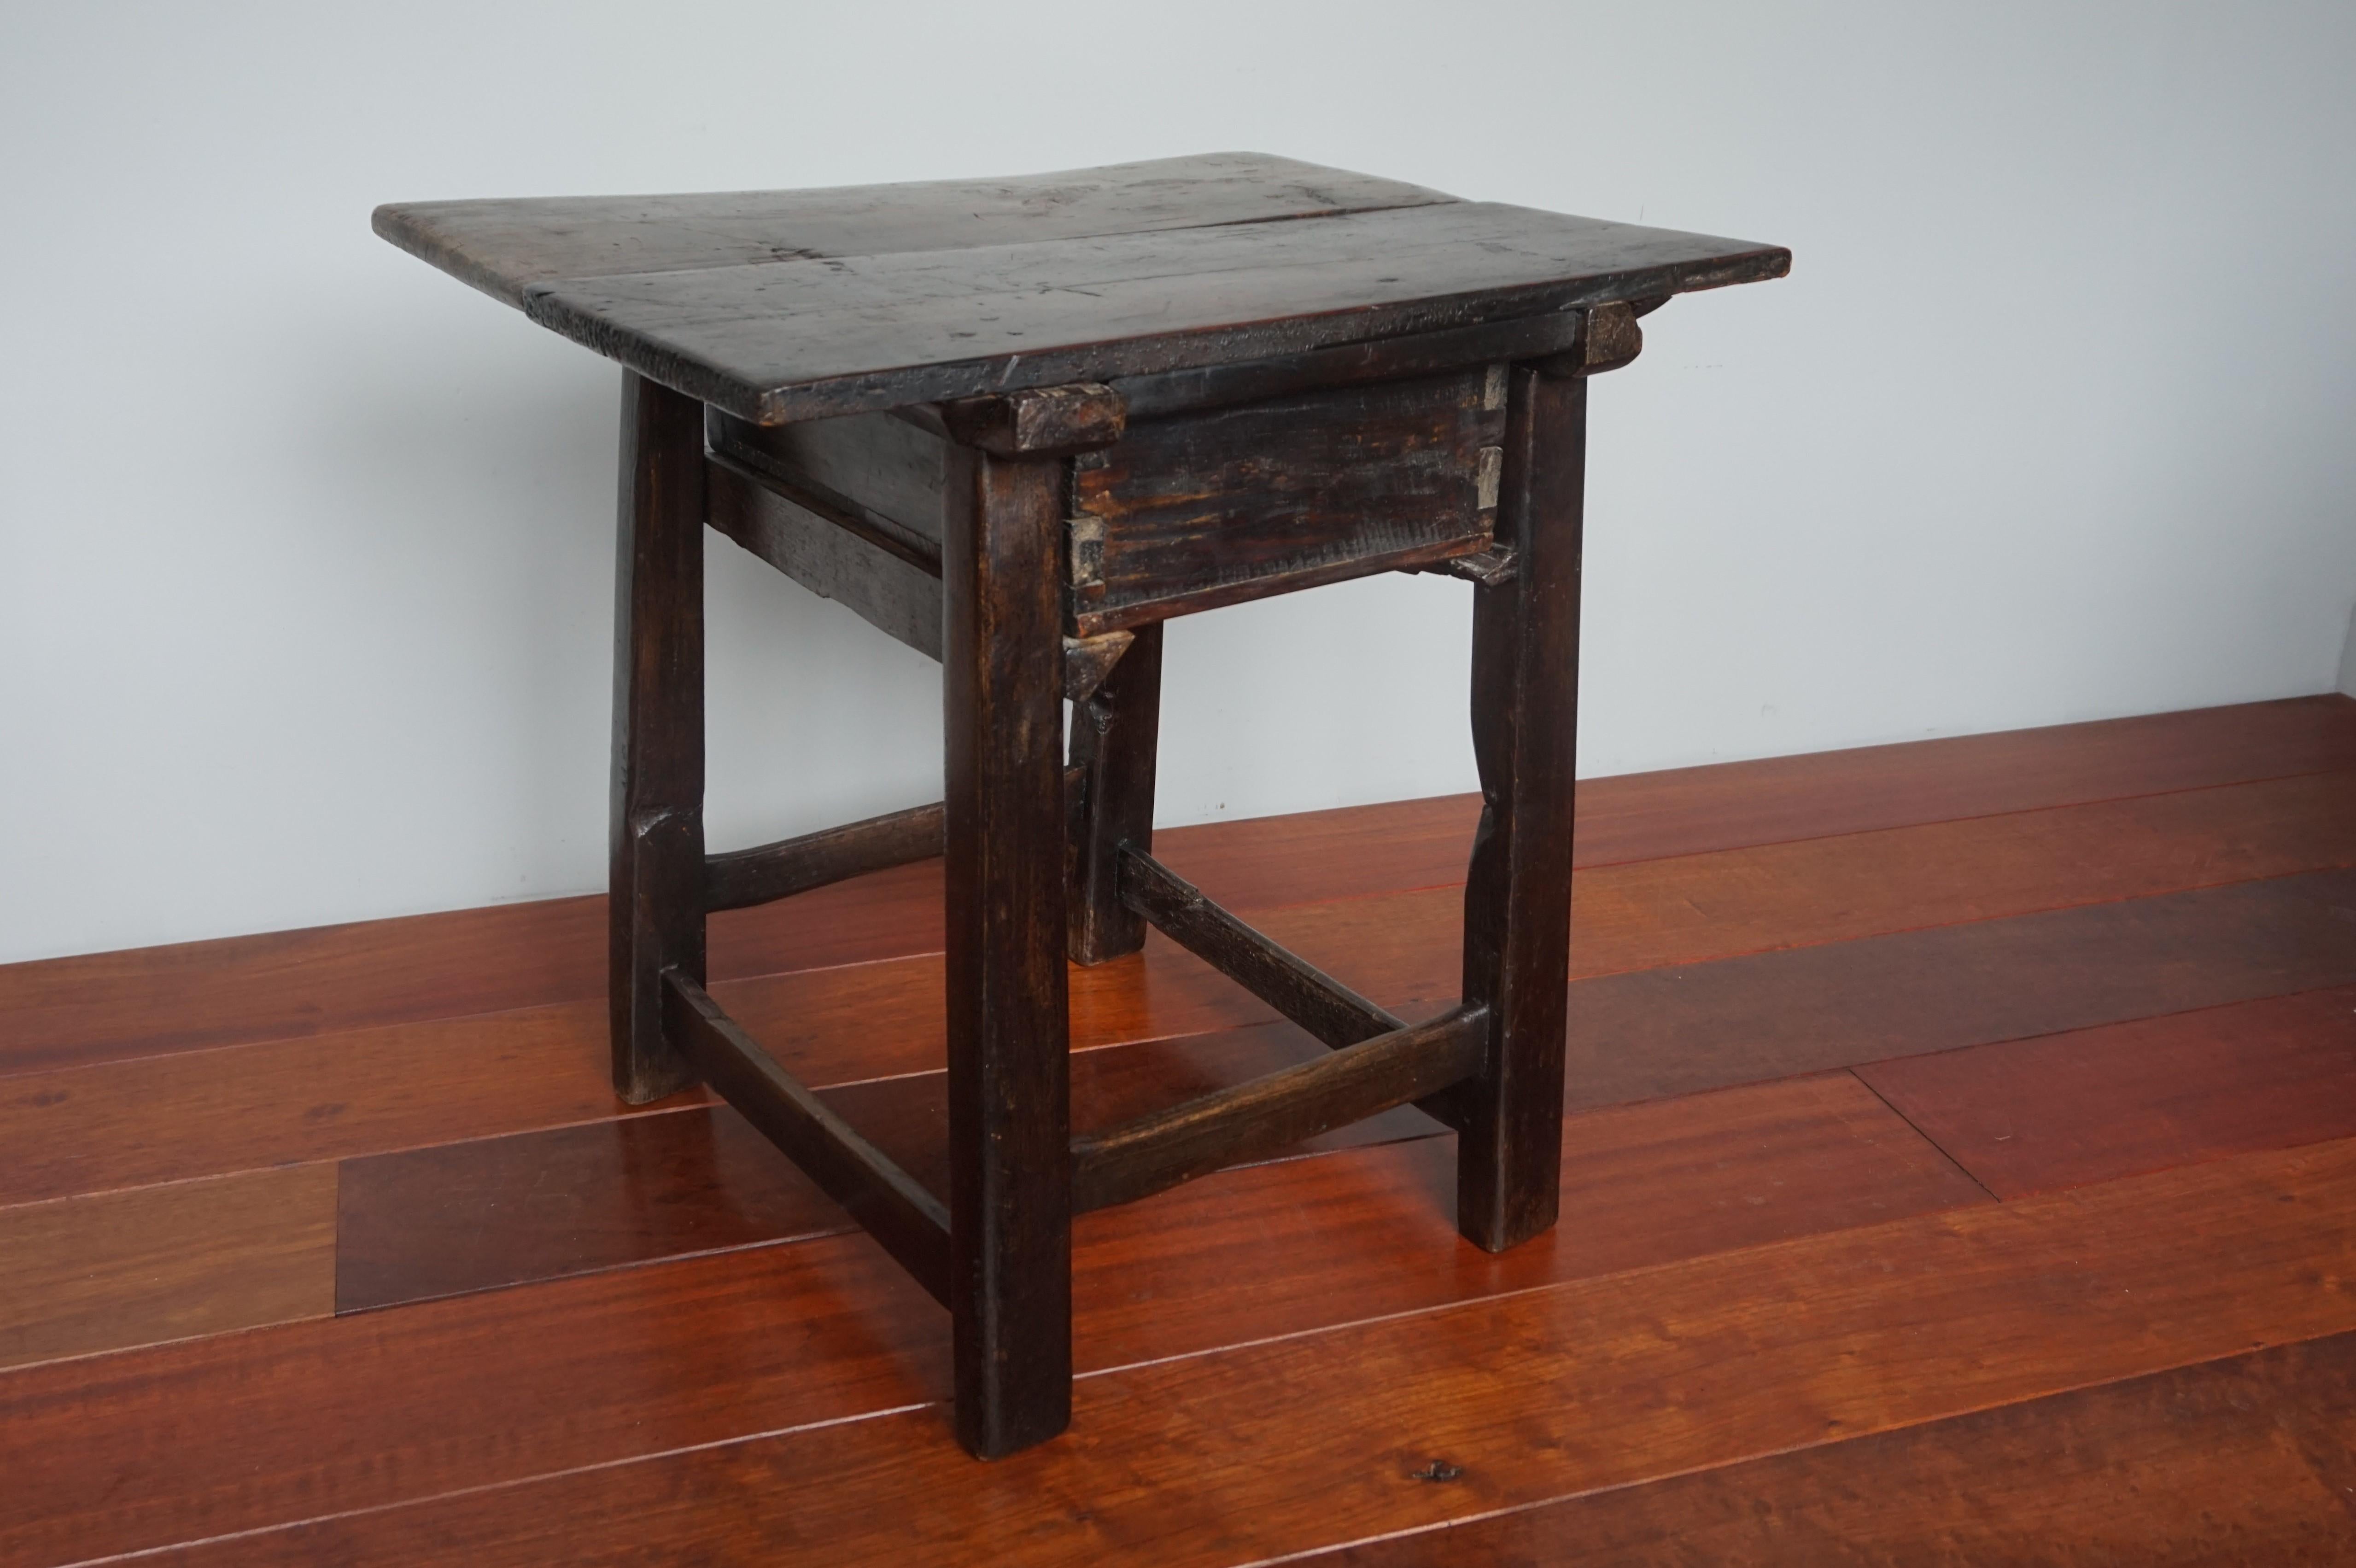 Antique and Rustic Early 1700s Wooden Spanish Countryside Pay Table with Drawer 11